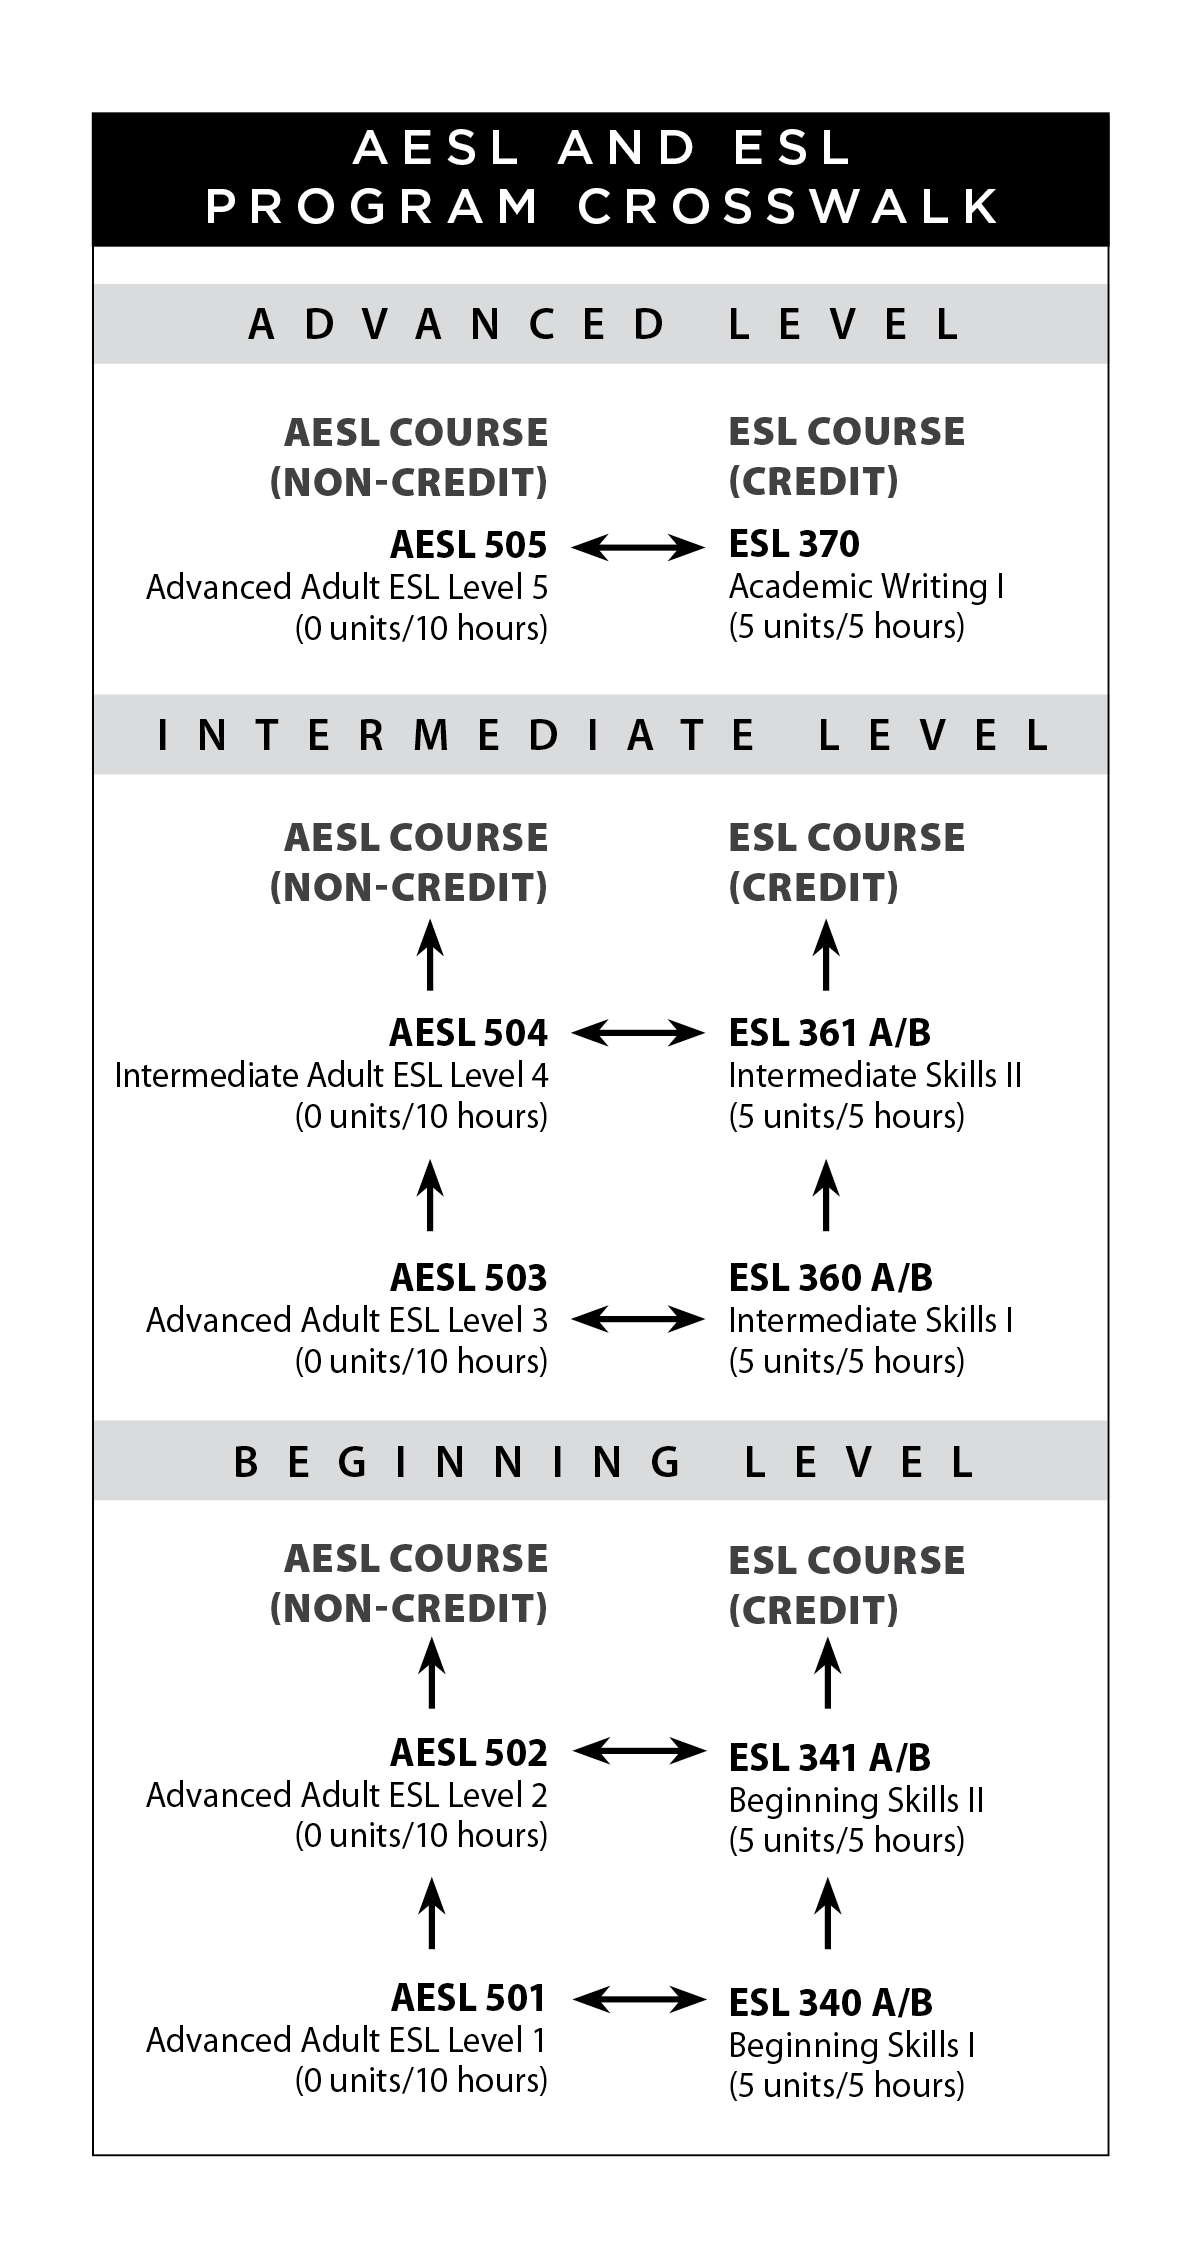 This chart shows the parallels between AESL non-credit courses and ESL credit courses. In the beginning level, AESL 501, which leads to AESL 502, is parallel to ESL 340/AB, which leads to ESL 341 A/B. In the intermediate level, AESL 503, which leads to AESL 504, is parallel to ESL 360 A/B, which leads to ESL 361. In the advanced level, AESL 505 is parallel to ESL 370.